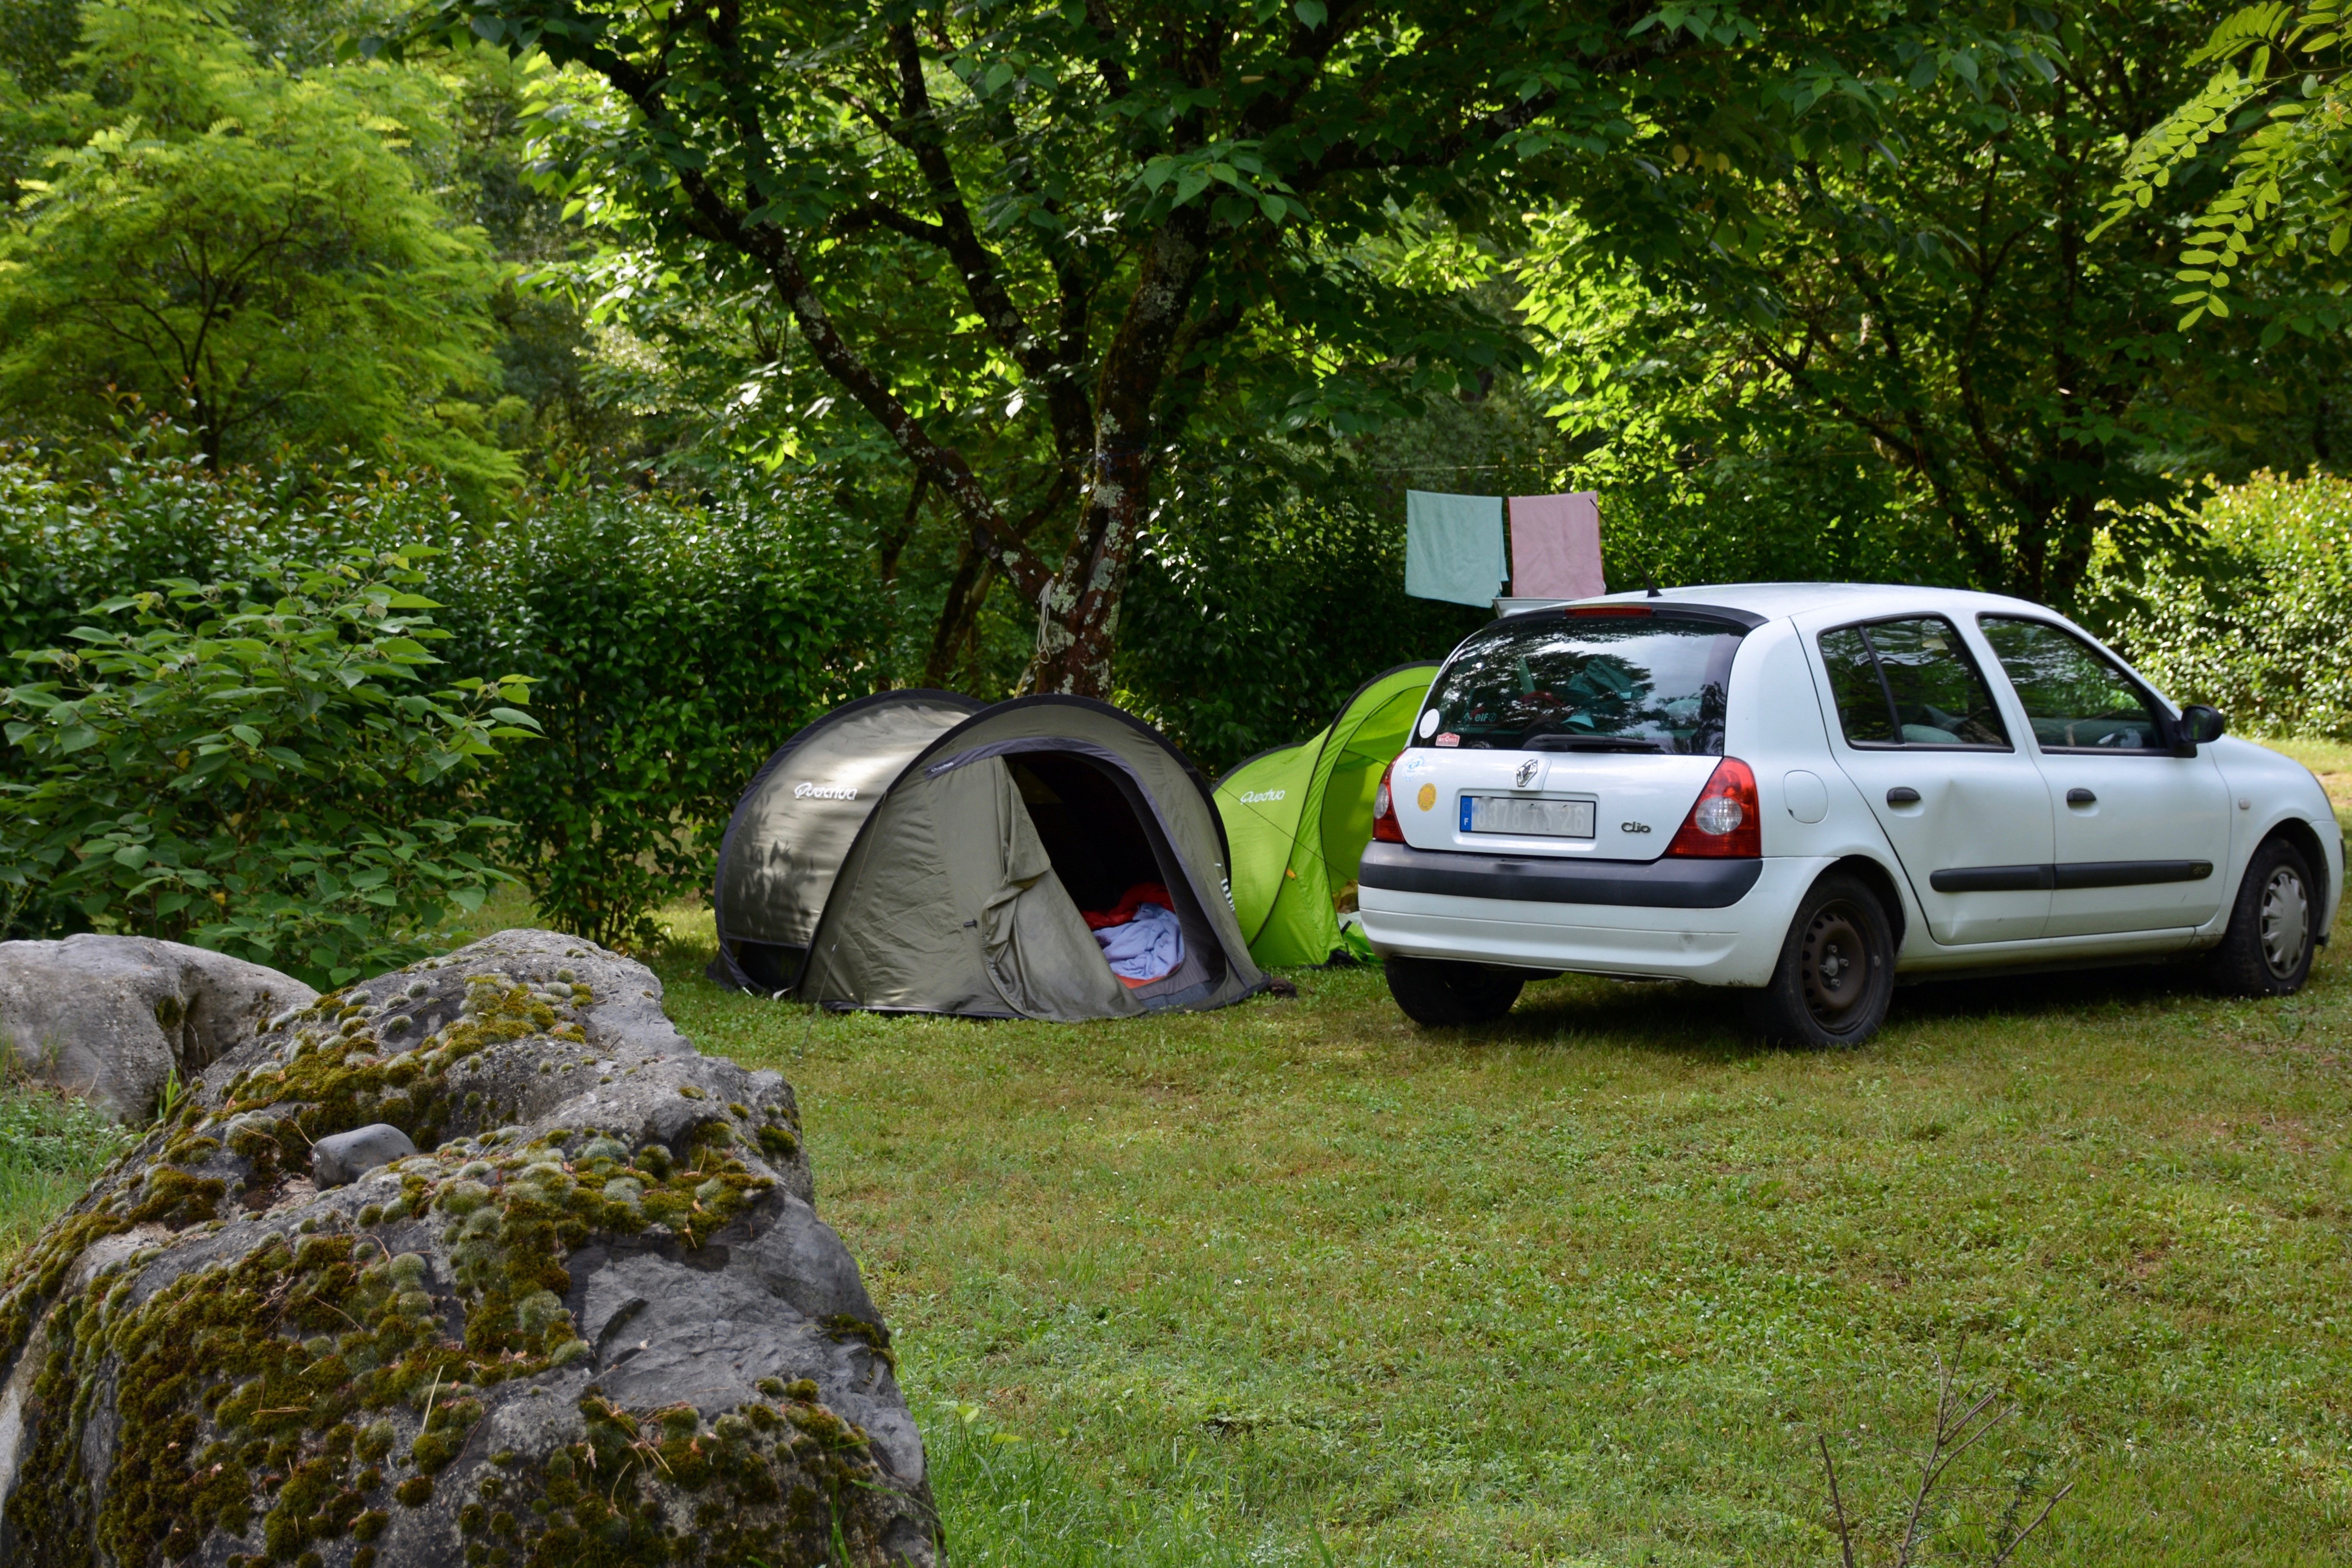 Pitch - Pitch 100M² : Car + Tent/Caravan Or Camping-Car - Camping Le Coin Charmant